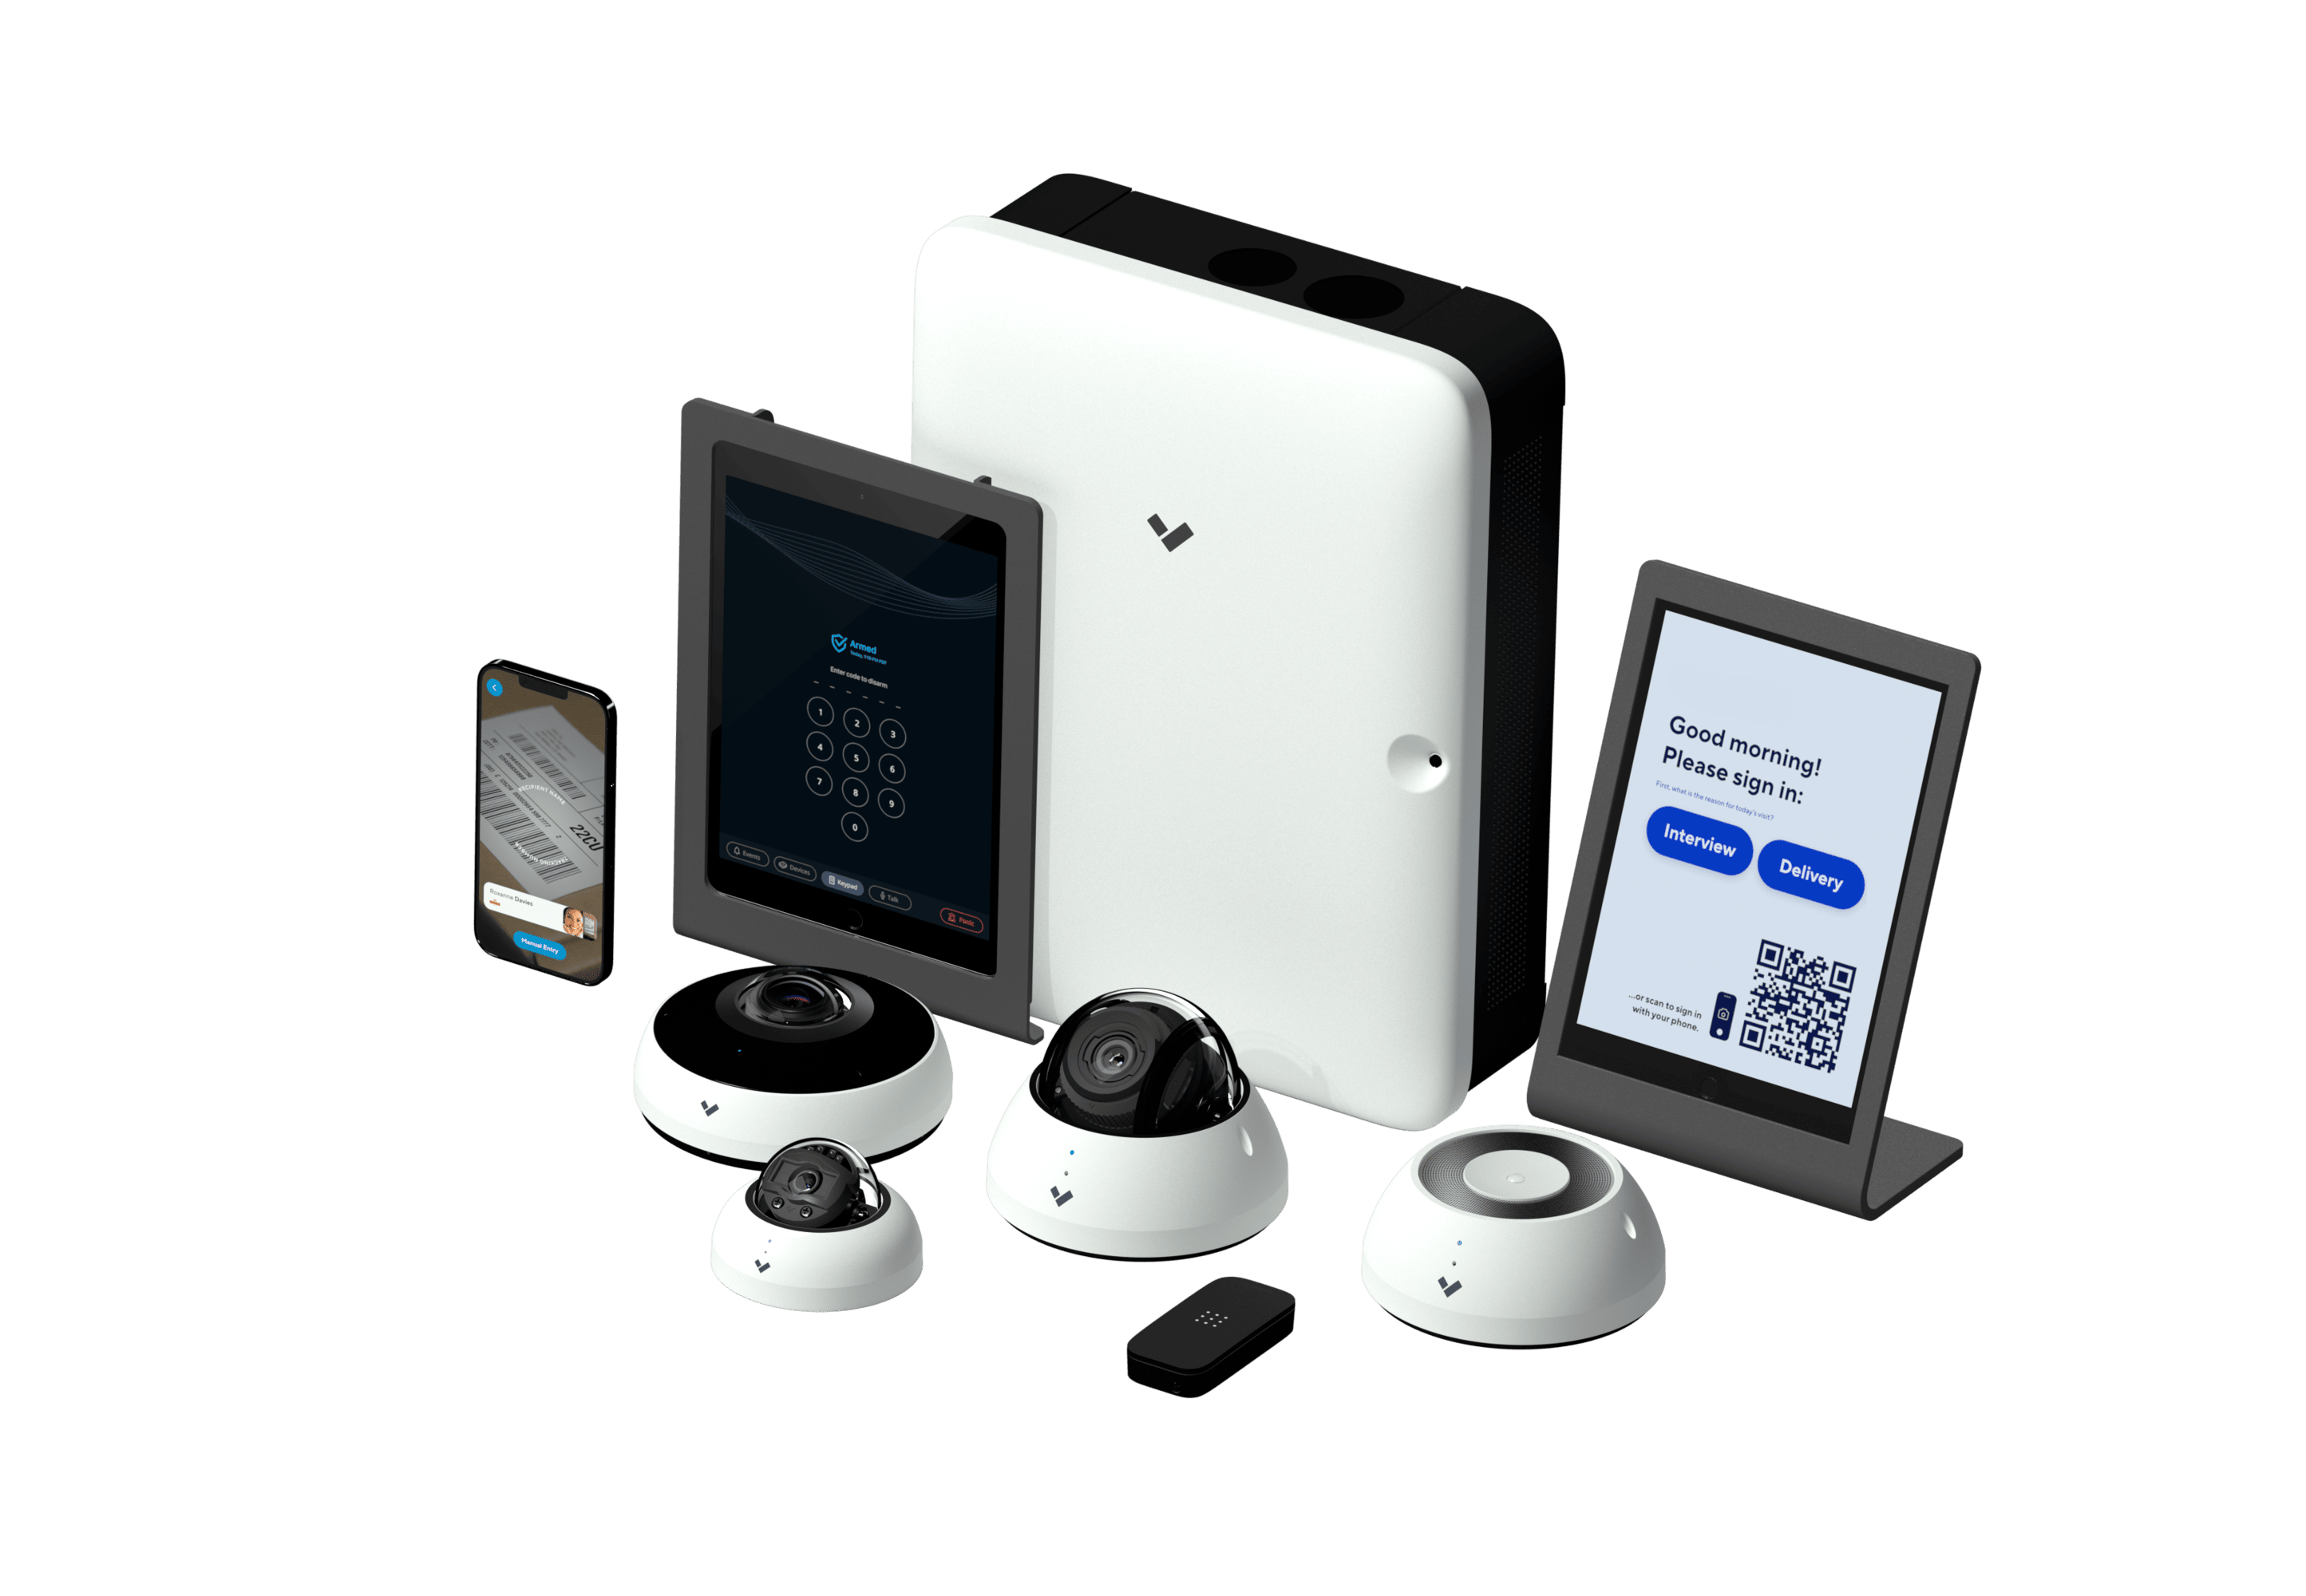 Verkada family of restaurant security cameras and devices